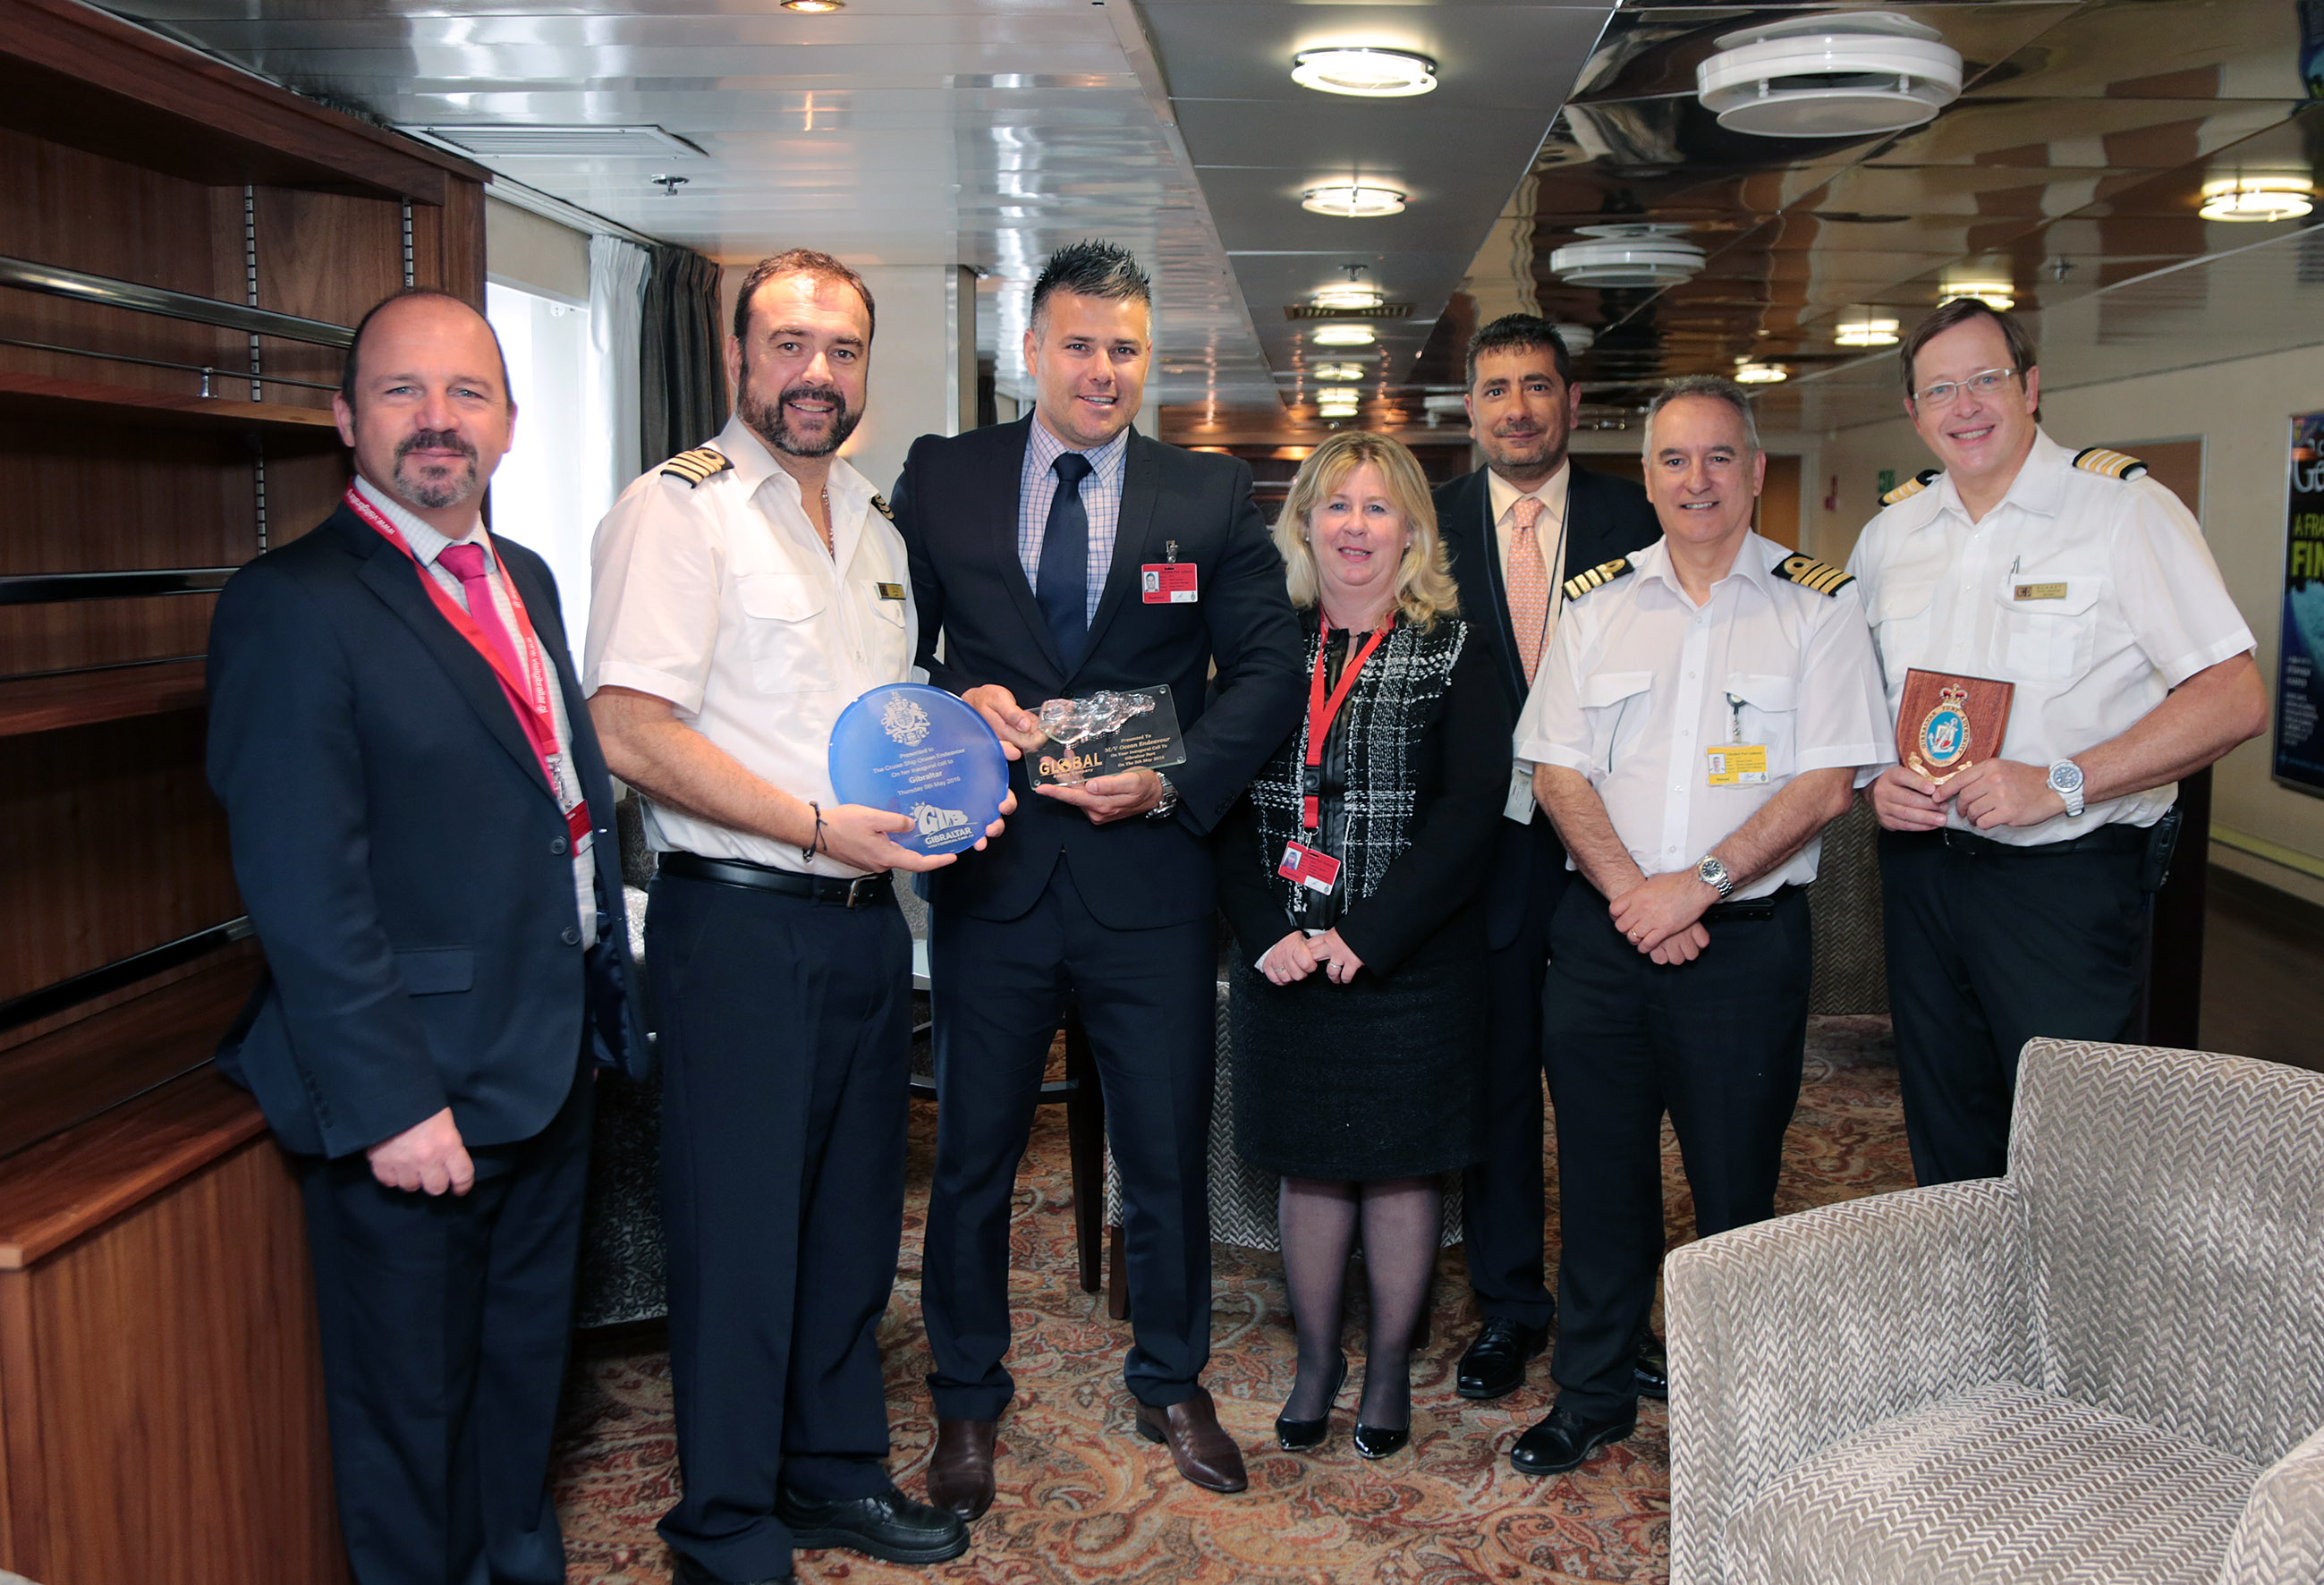 Ship’s officers with Nicky Guerrero and Suyenne Catania from GTB, Manolo Tirado plus Michael Borda and Dysan Goldwin from the ship’s agents, Global Agency.